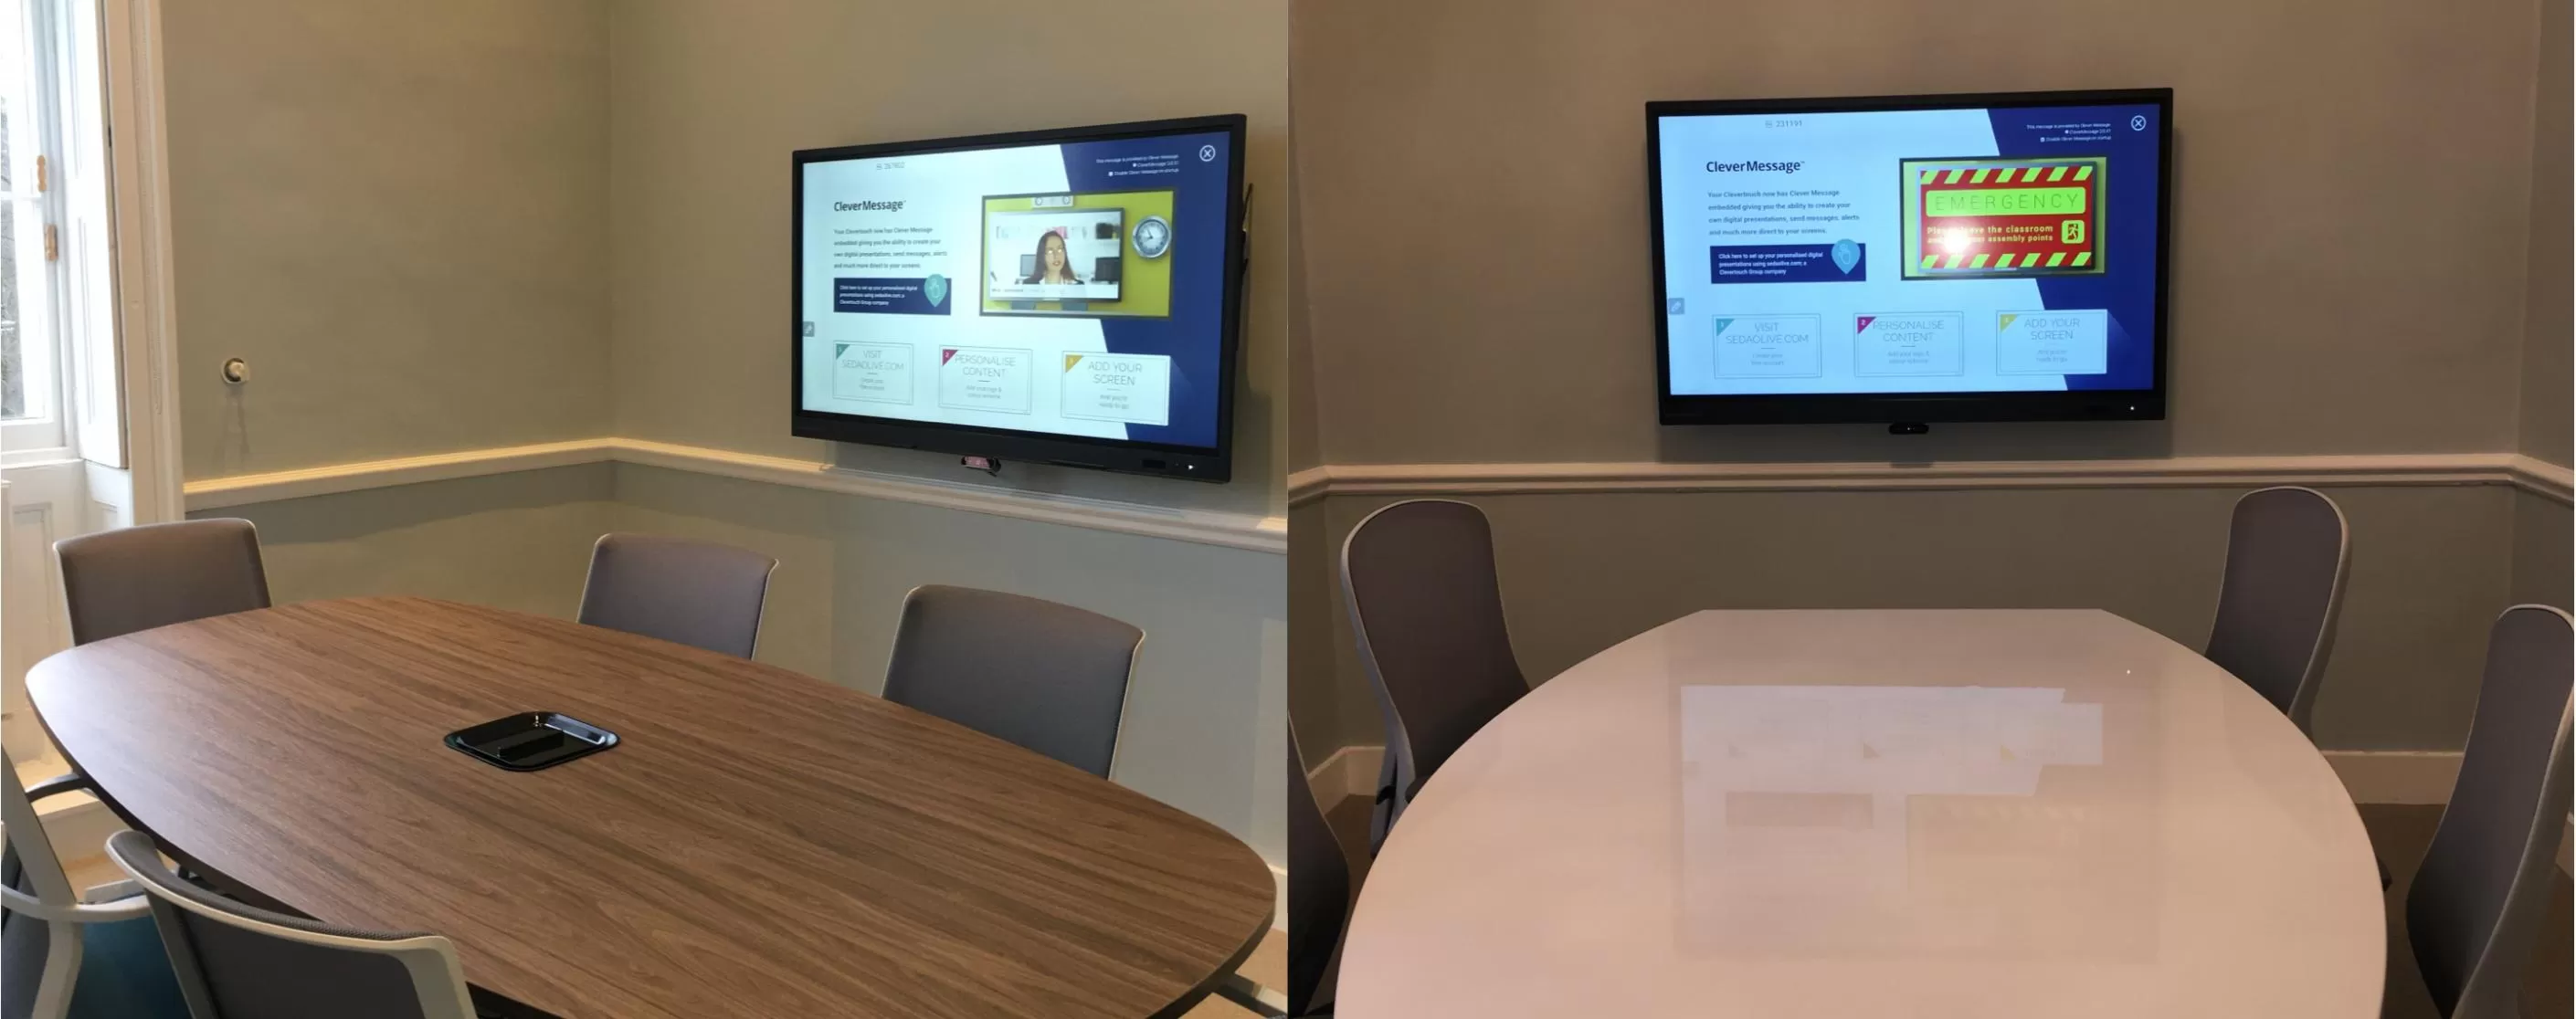 2 medium meeting rooms with UX Pro screens displaying clever message